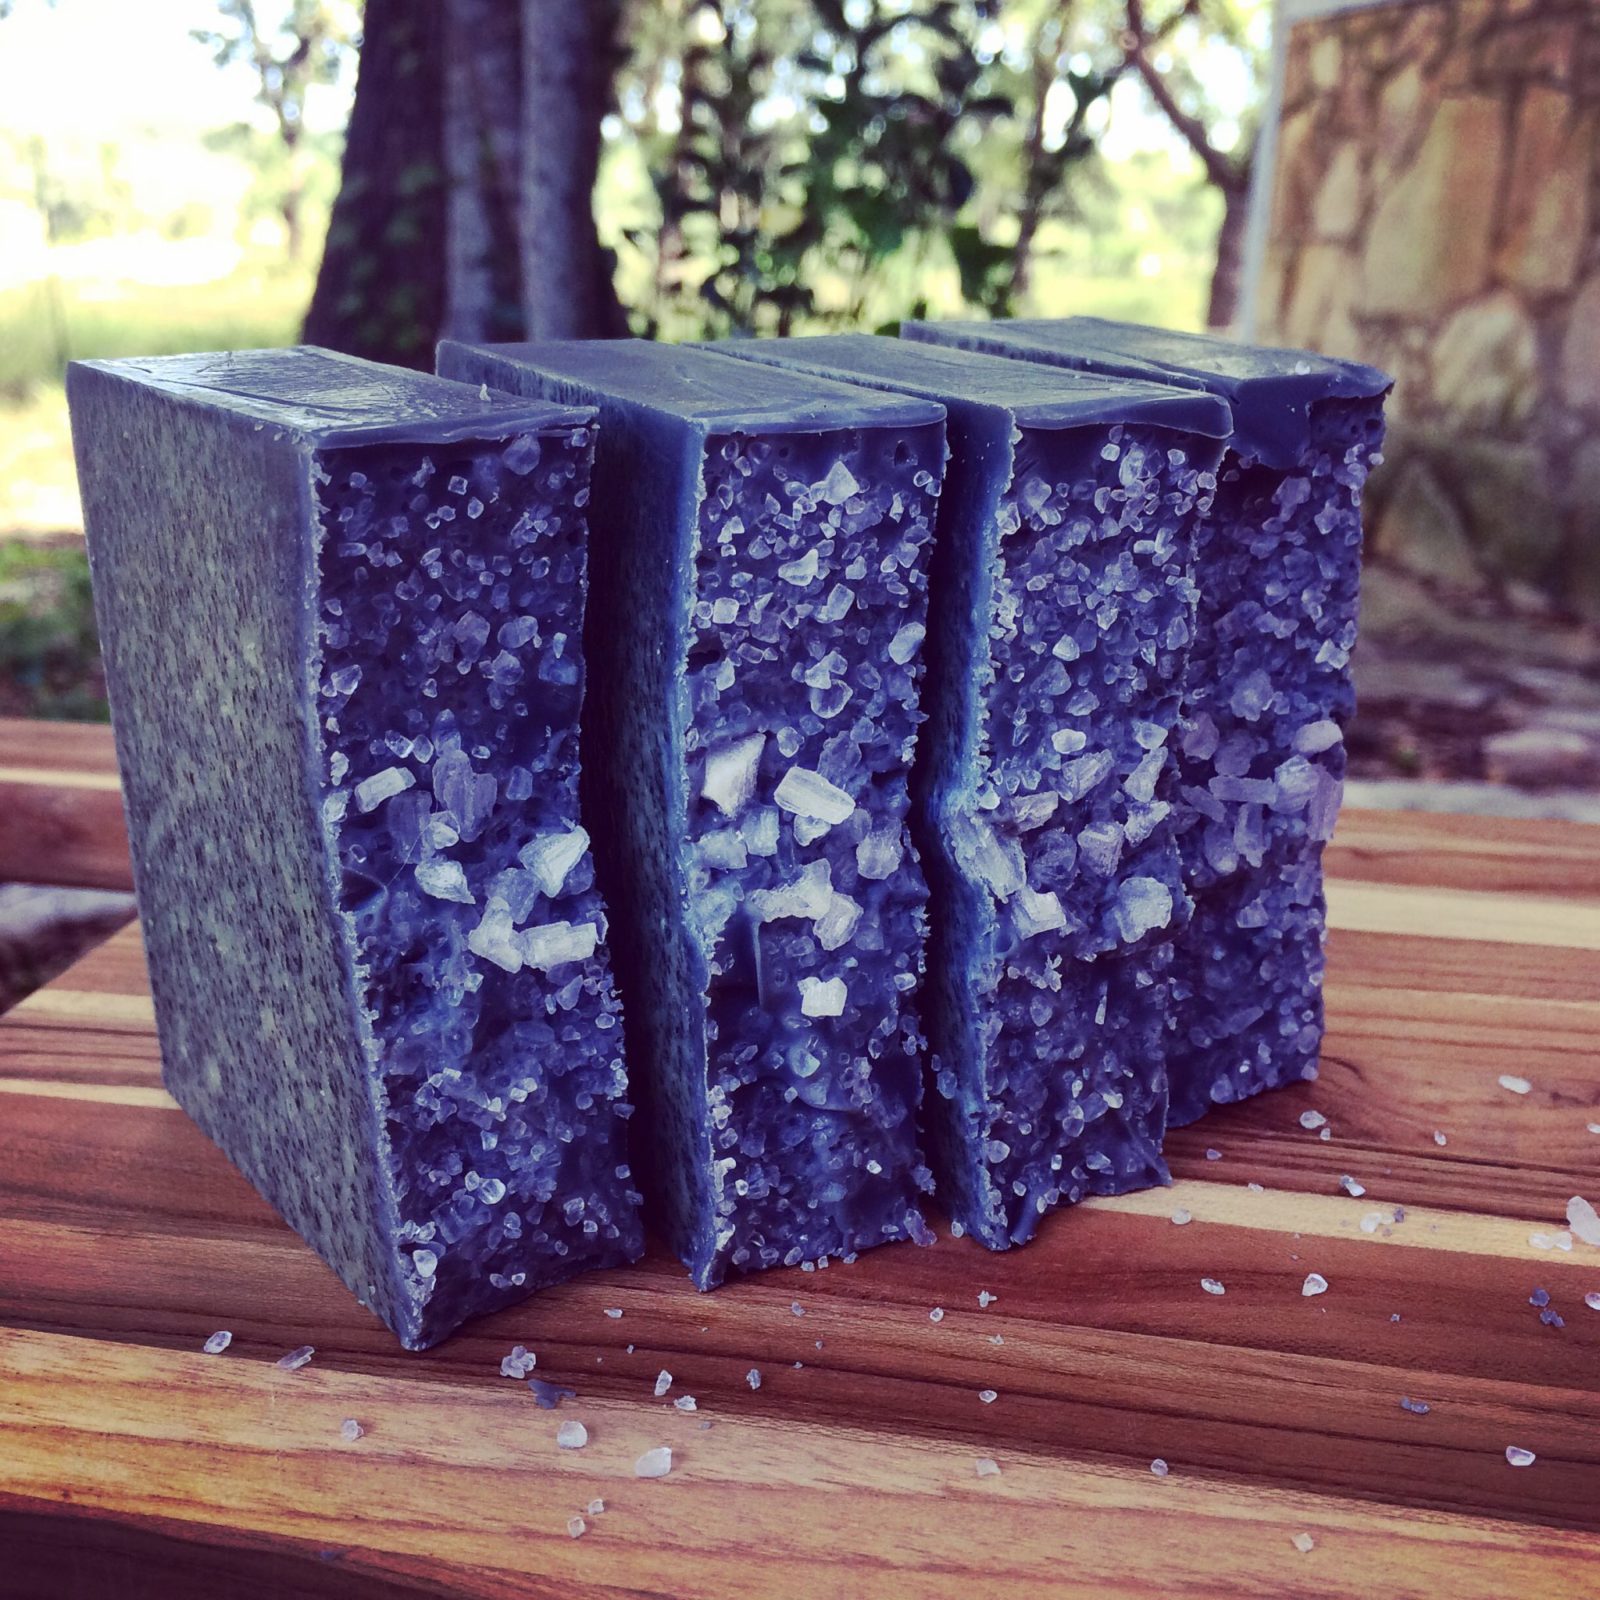 Focus and Meditation Limited Edition Soap for Blue Cypress School by Old Factory